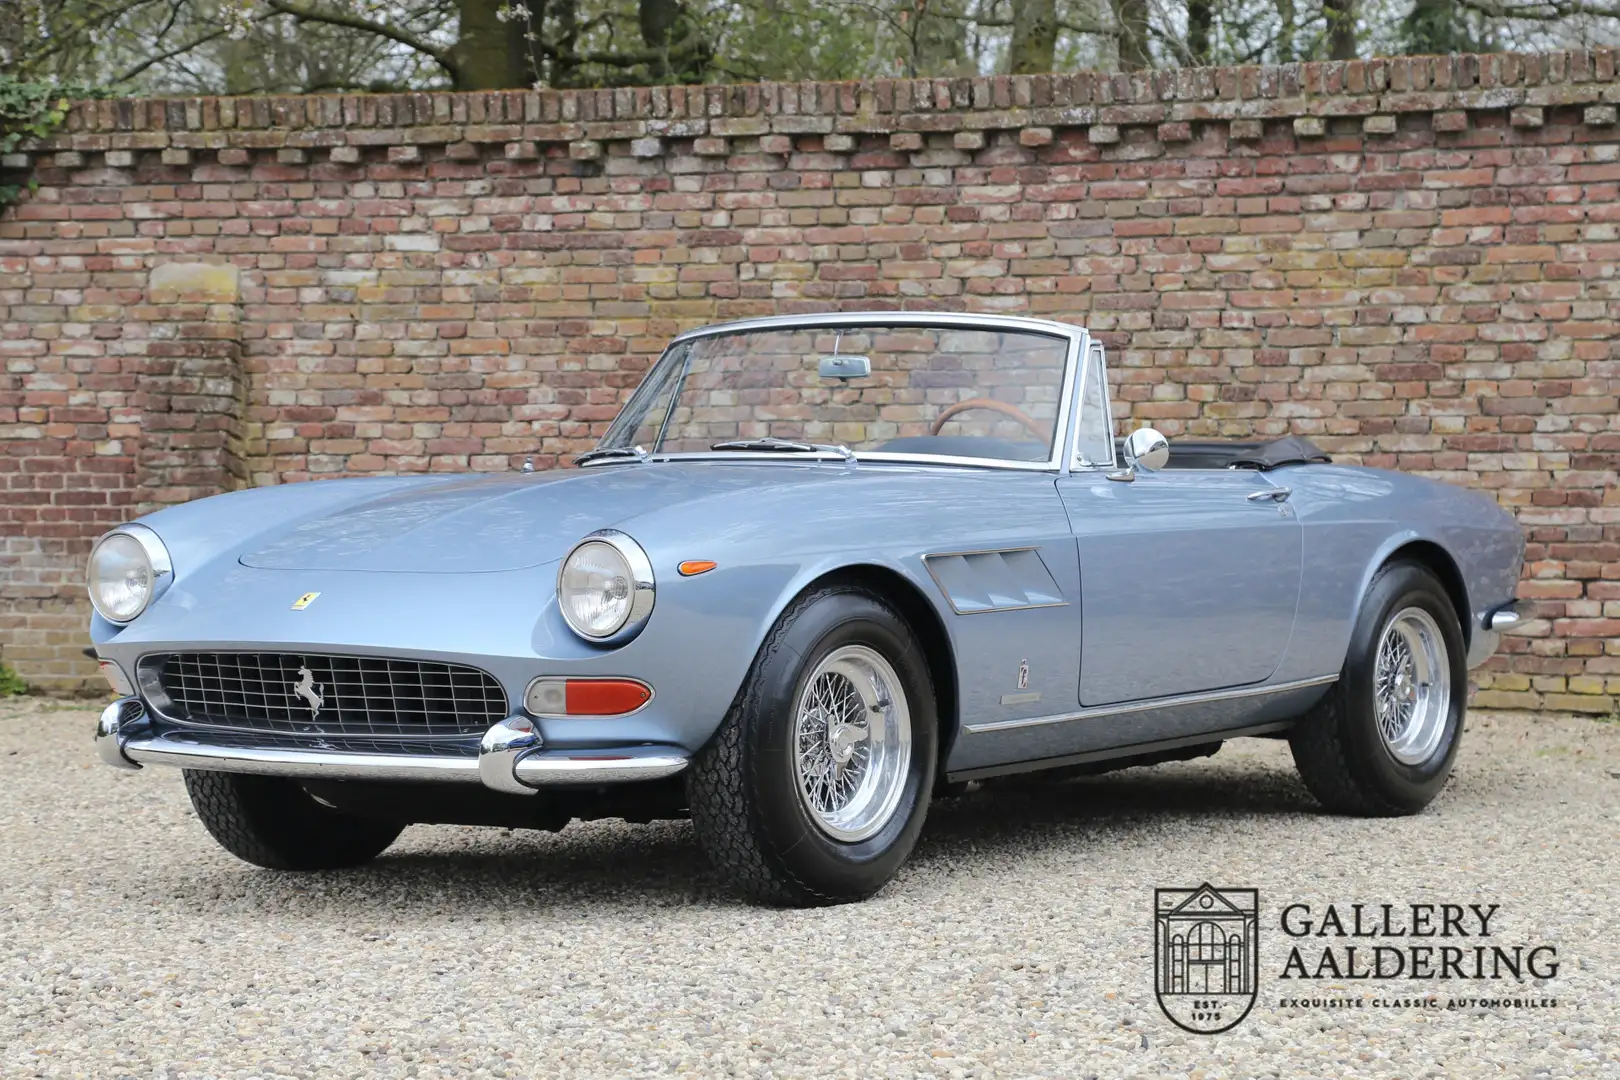 Ferrari 275 GTS 34000 Miles! Equipped with factory hard top, F Blau - 1